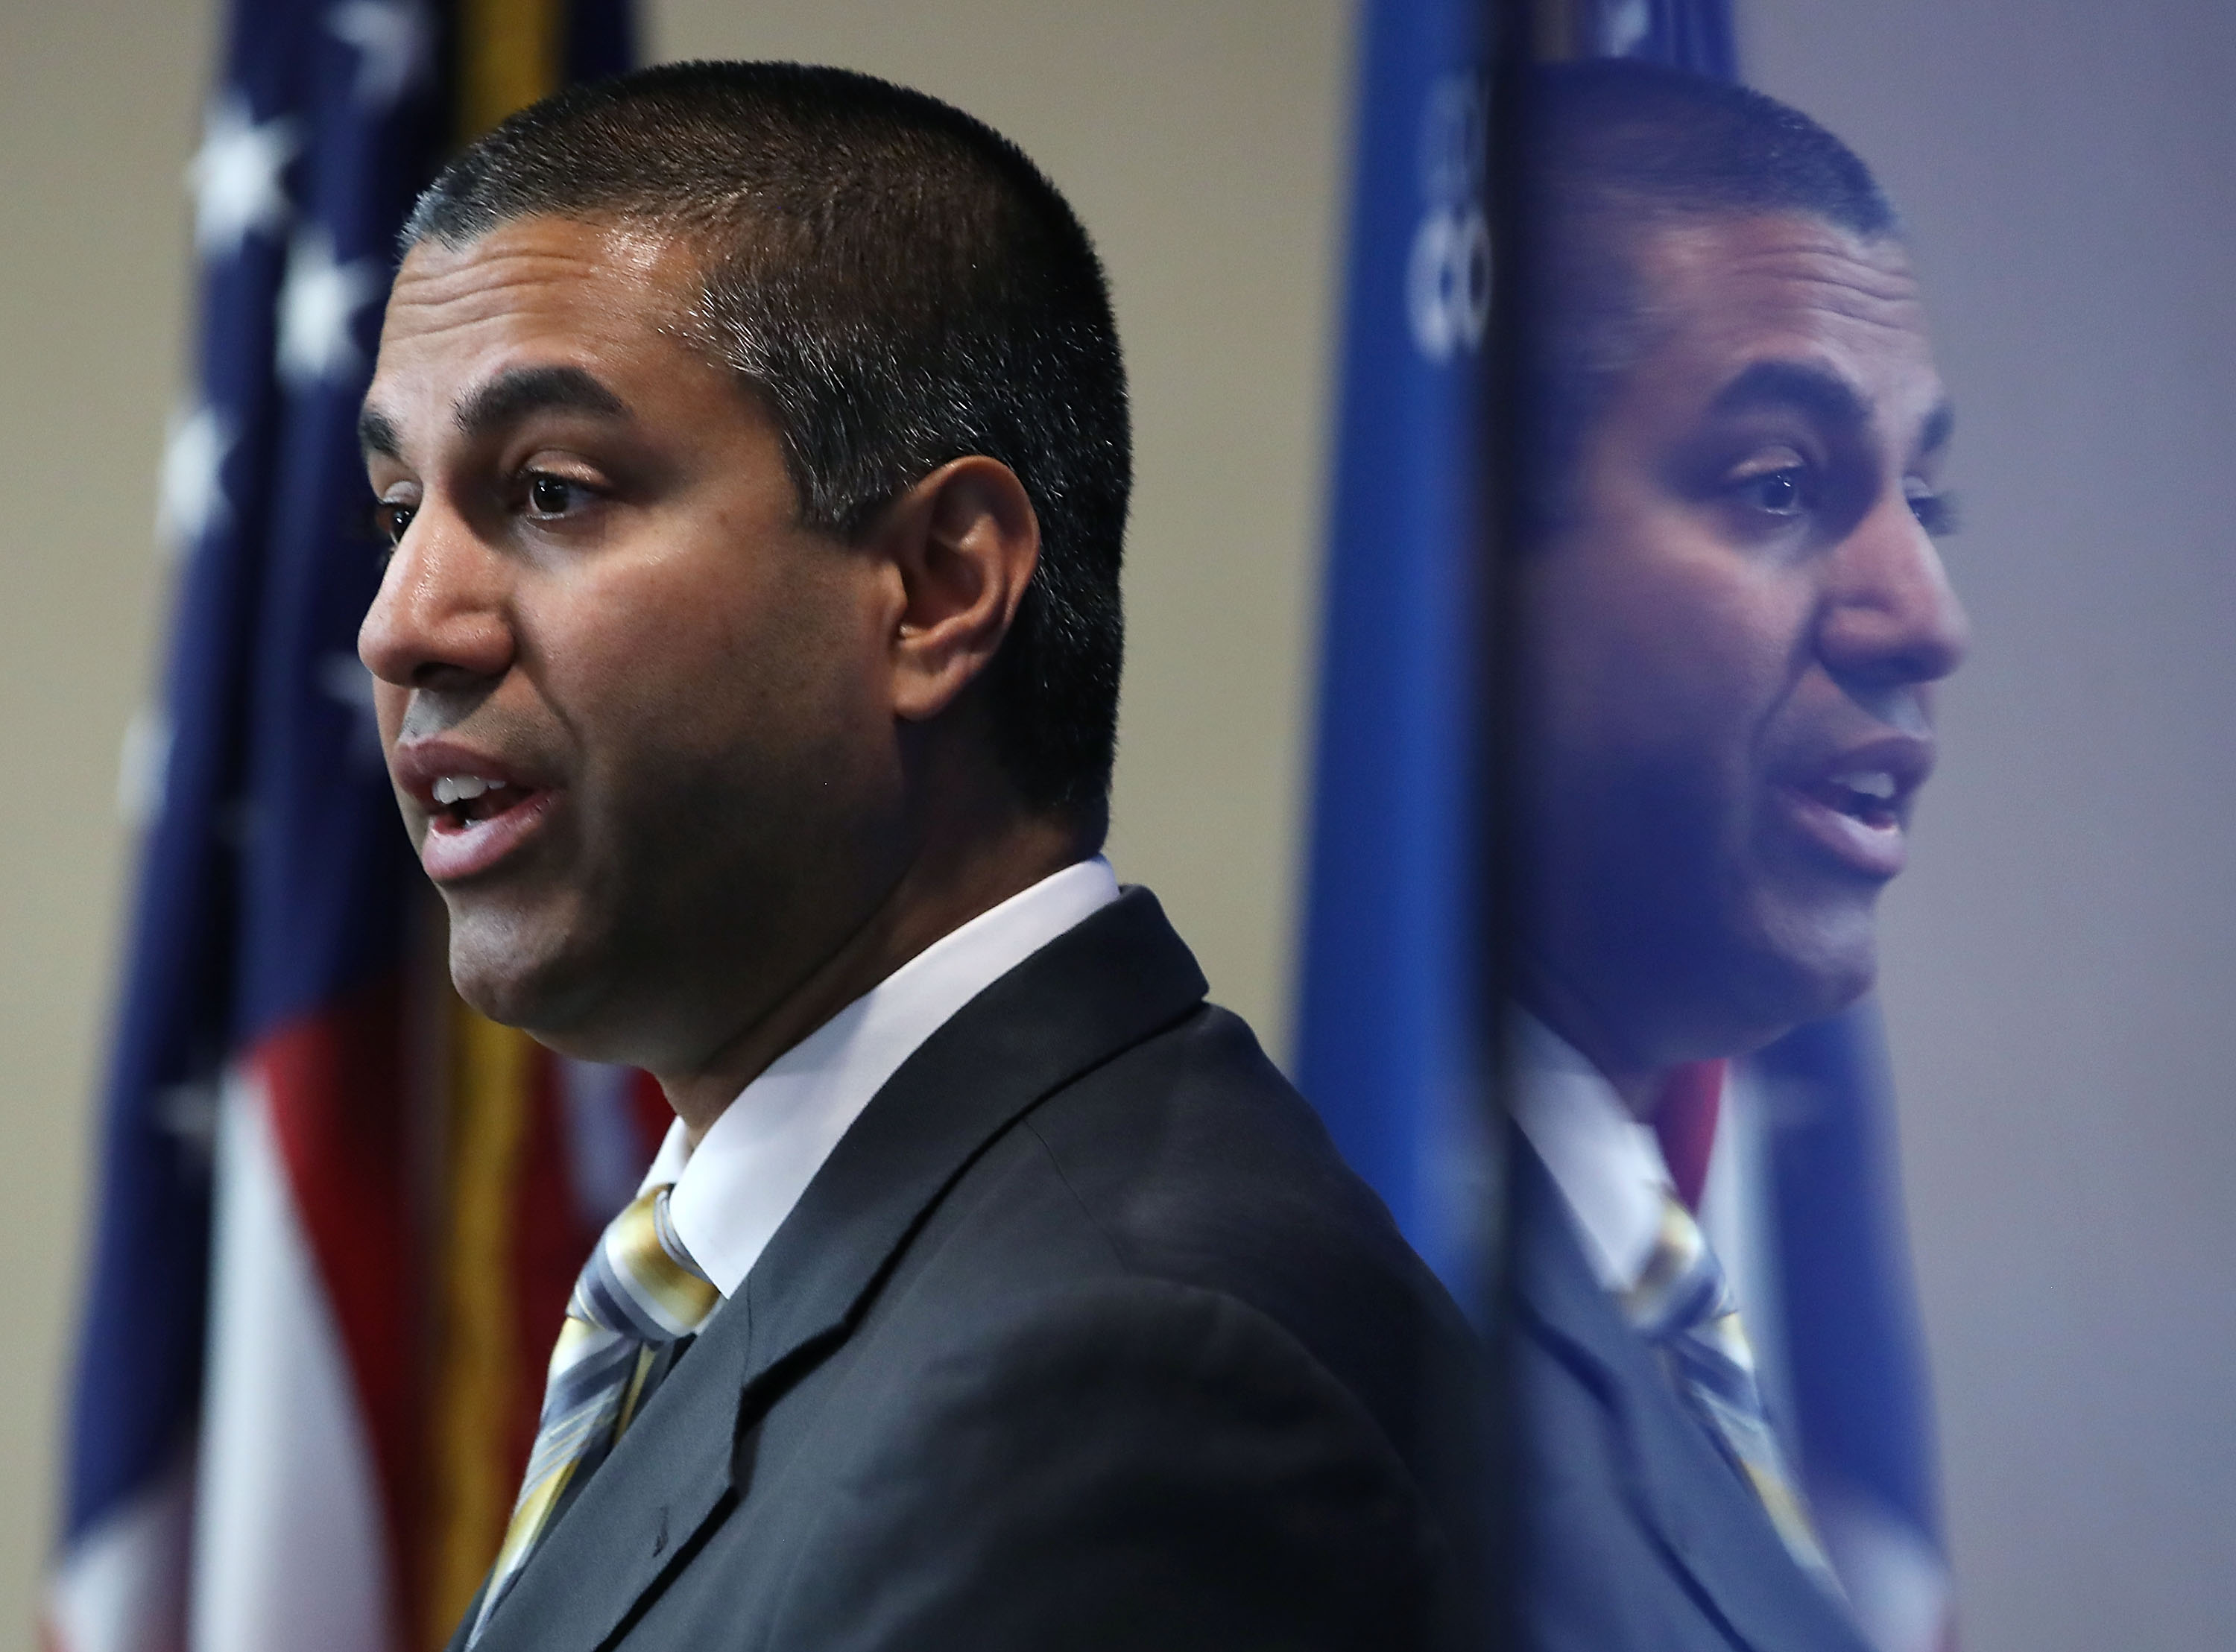 FCC Chairman Pai Attends News Conference On Providing Low Cost Student Internet